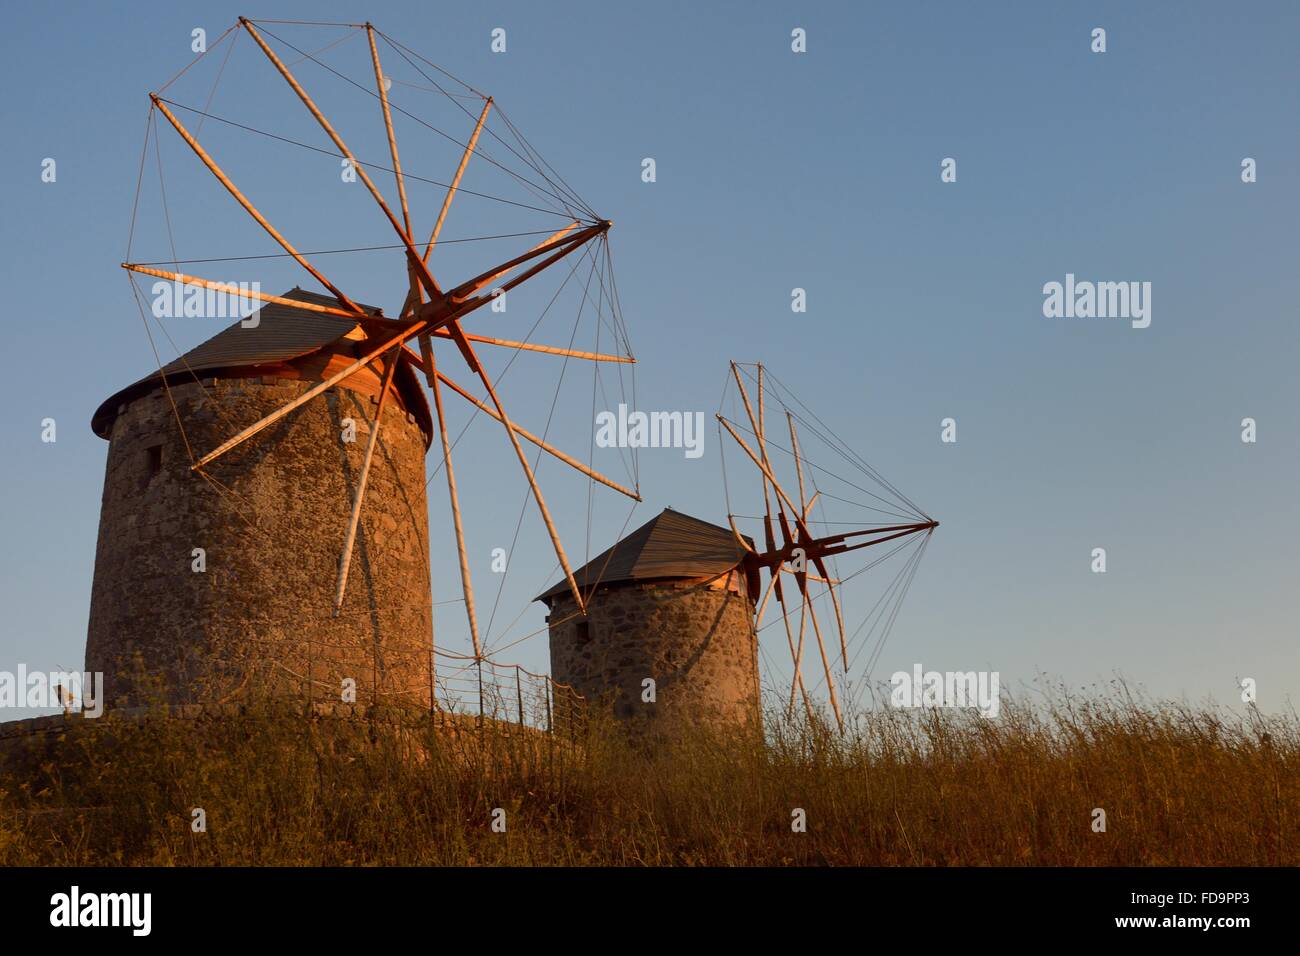 Restored windmills of the Monastery of St. John the Theologian at sunset, Chora, Patmos, Dodecanese Islands, Greece. Stock Photo